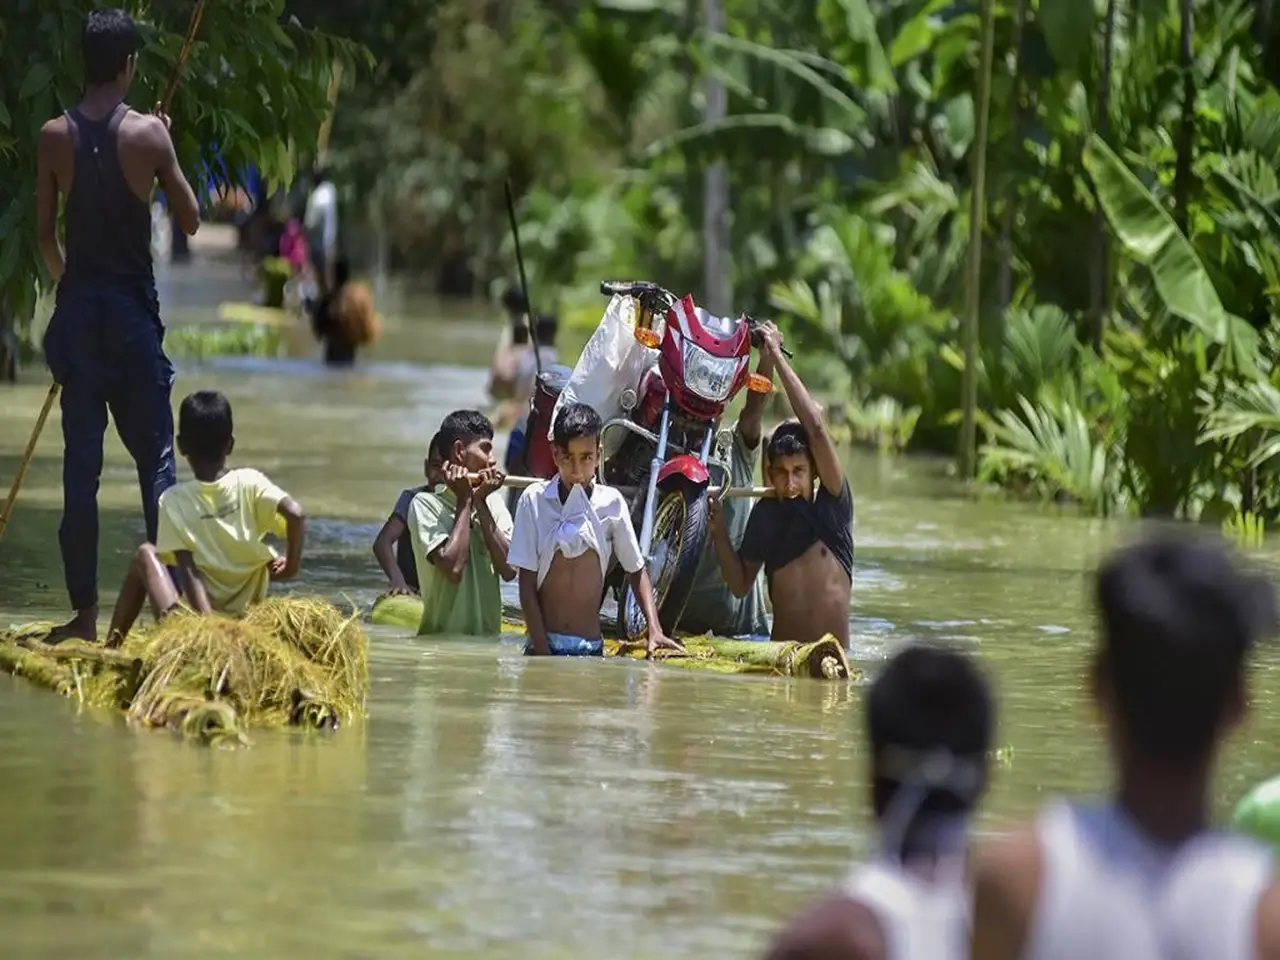 As floods continue in several parts of India, under the initiative of the Flipkart Foundation, Flipkart is also partnering with Goonj to raise funds